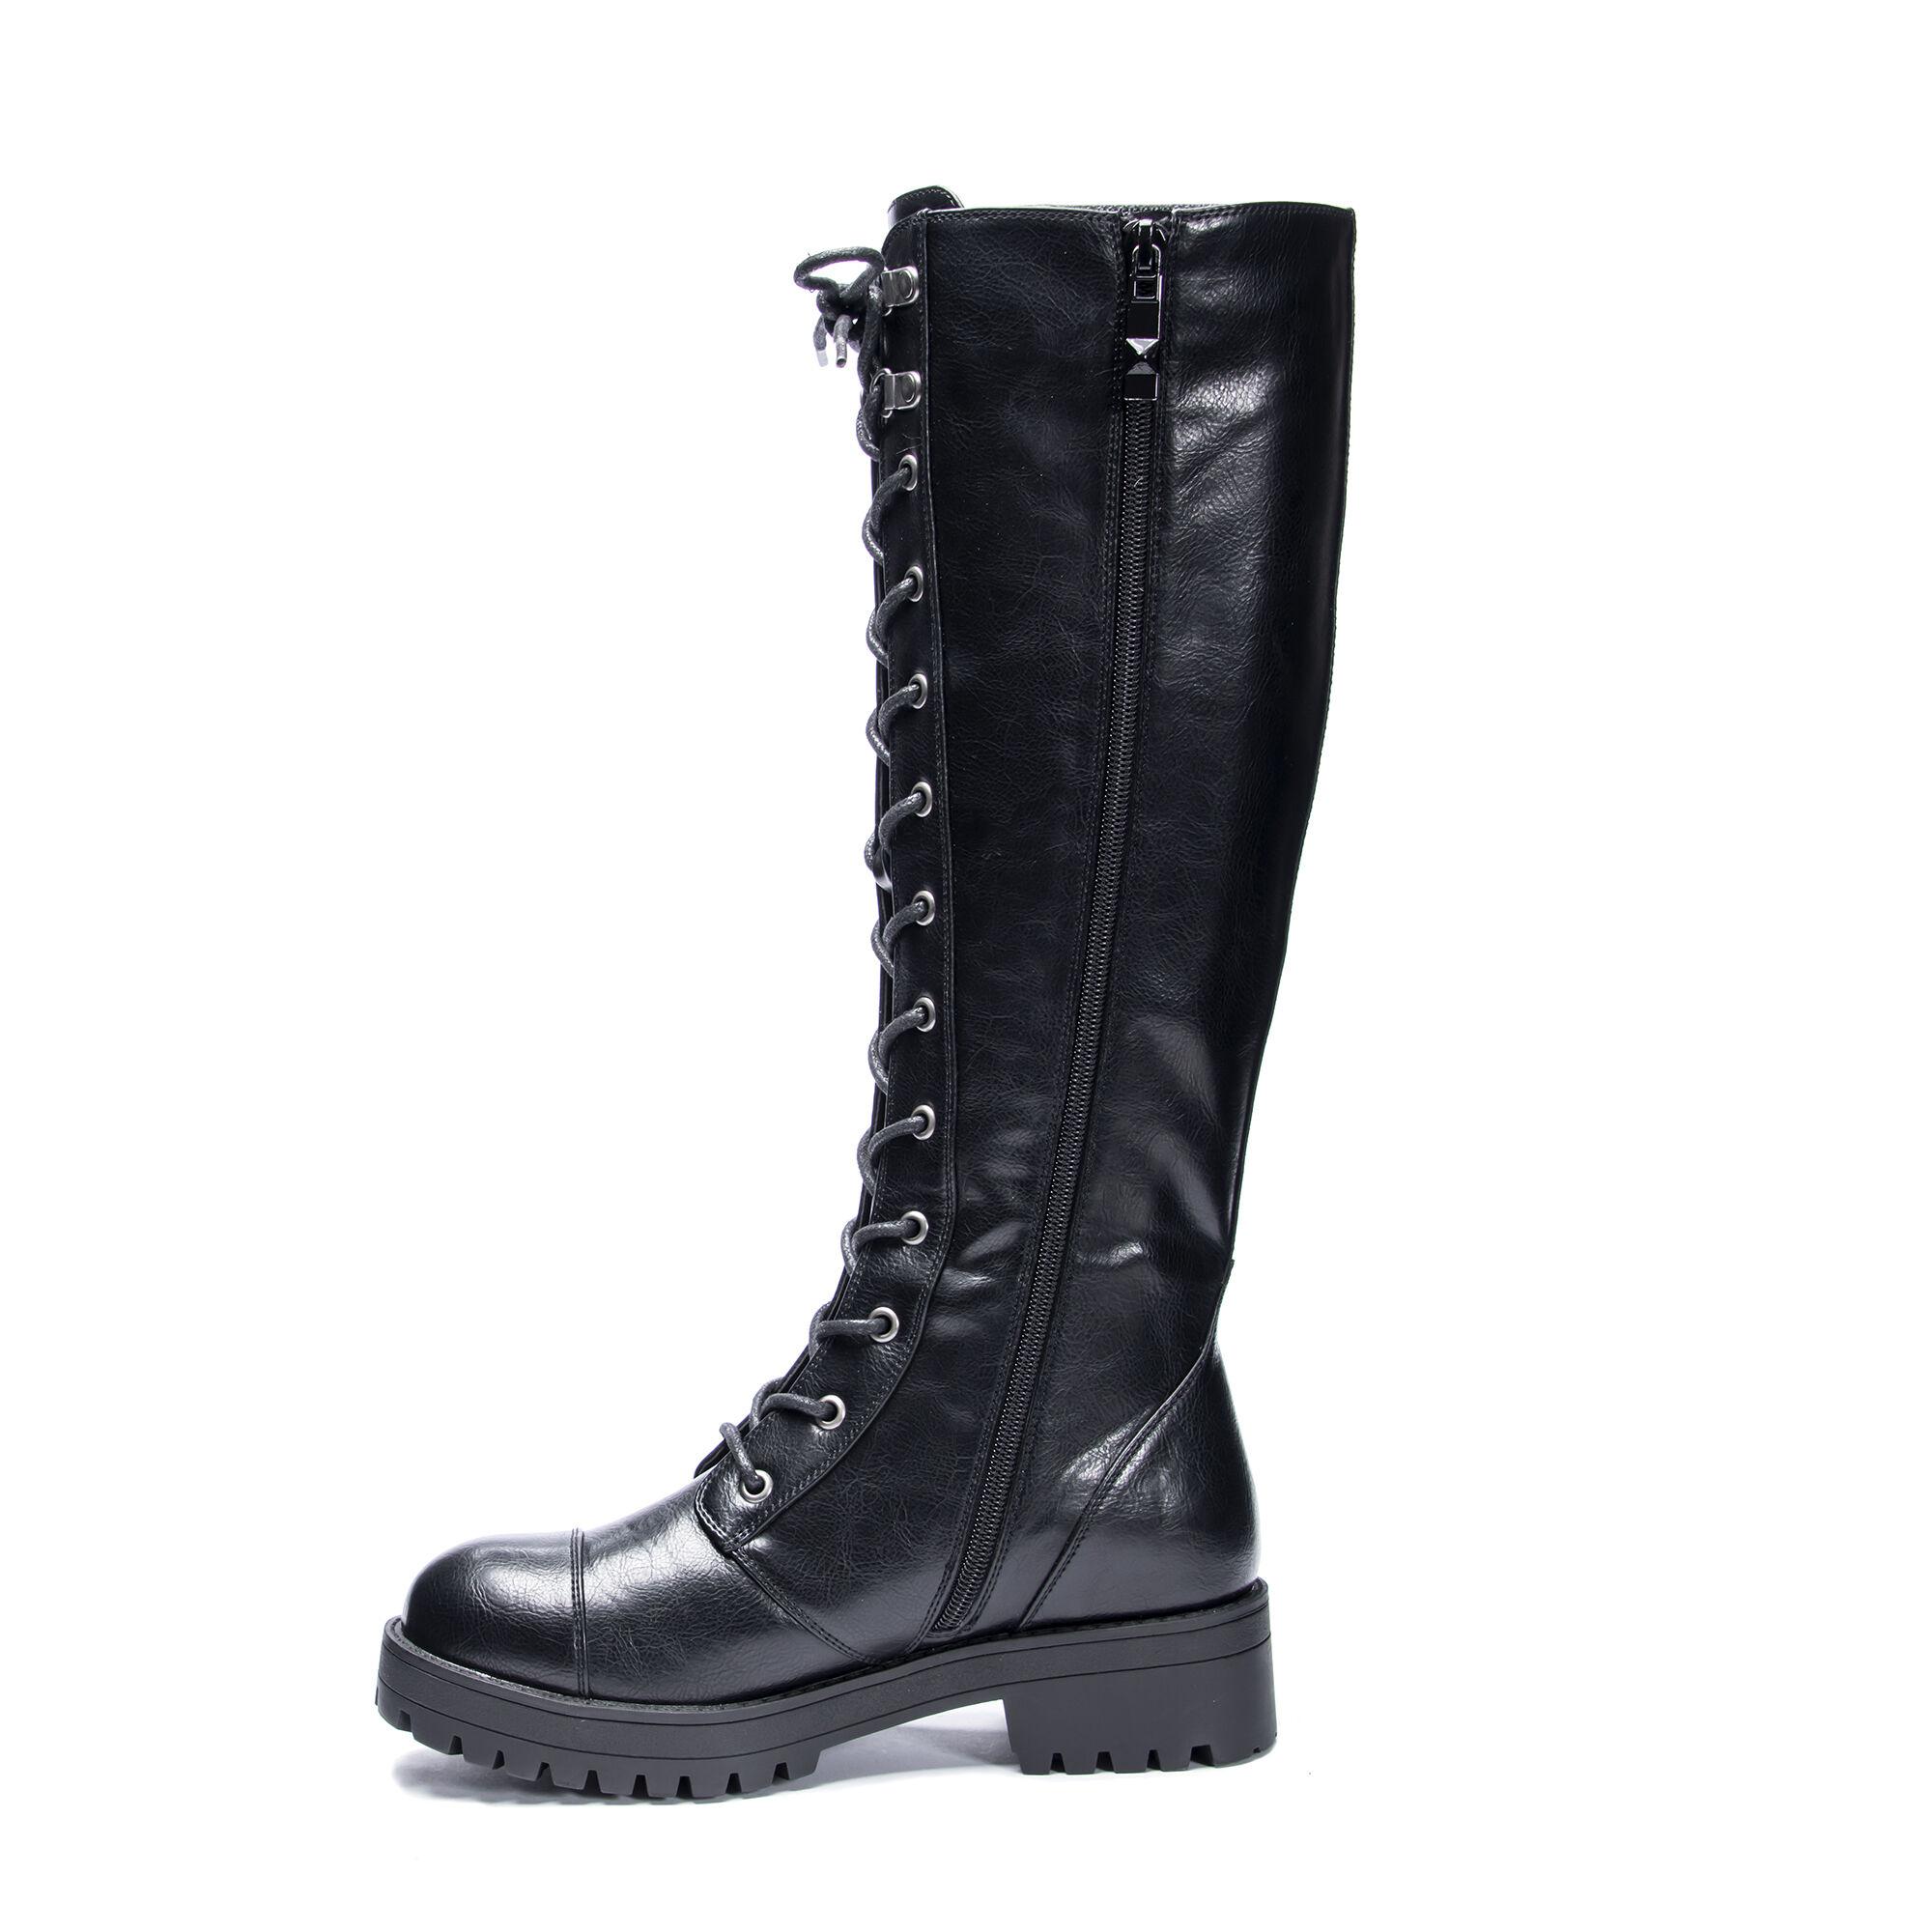 vandal boots clearance